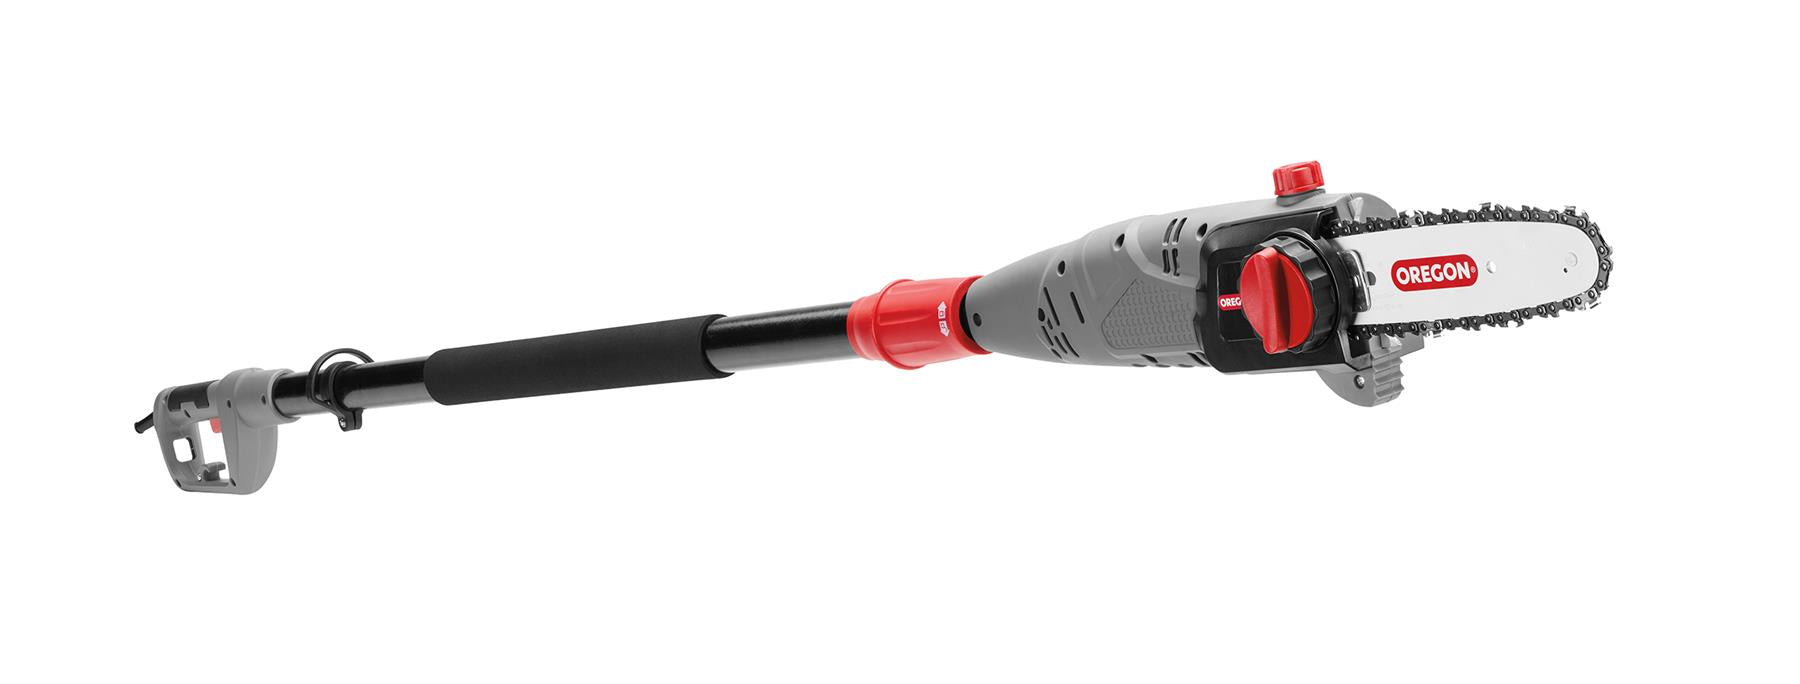 Oregon 621362 PS750 8", 6.5 Amp, Lightweight Corded Pole Saw